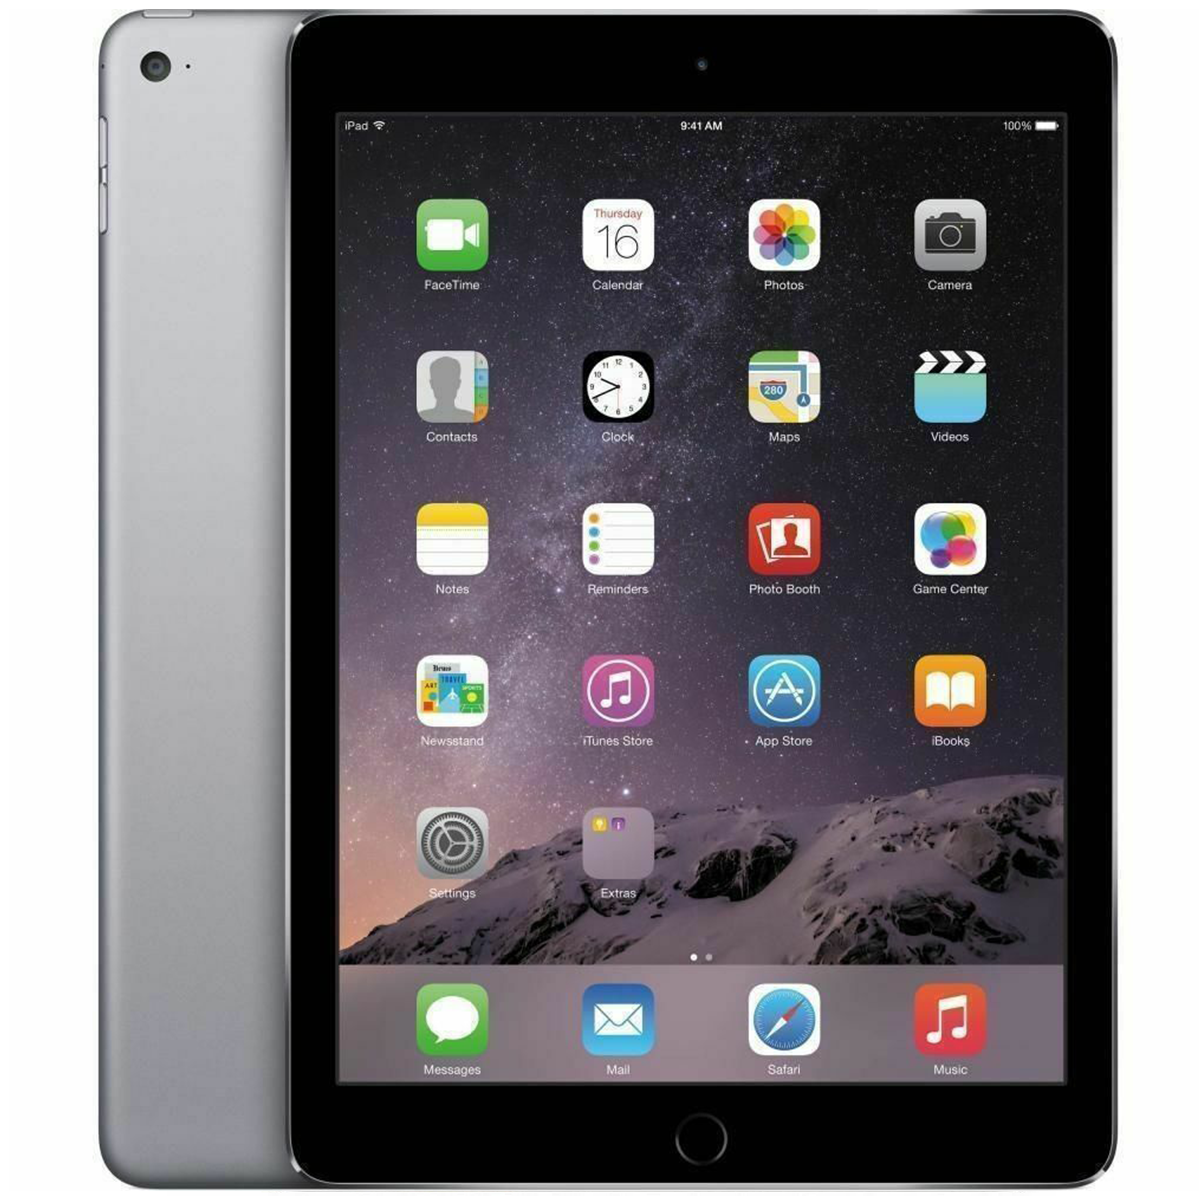 Restored Apple iPad Air 2 64GB, Wi-Fi, 9.7" - Space Gray - (MGKL2LL/A) (Refurbished) - image 1 of 3